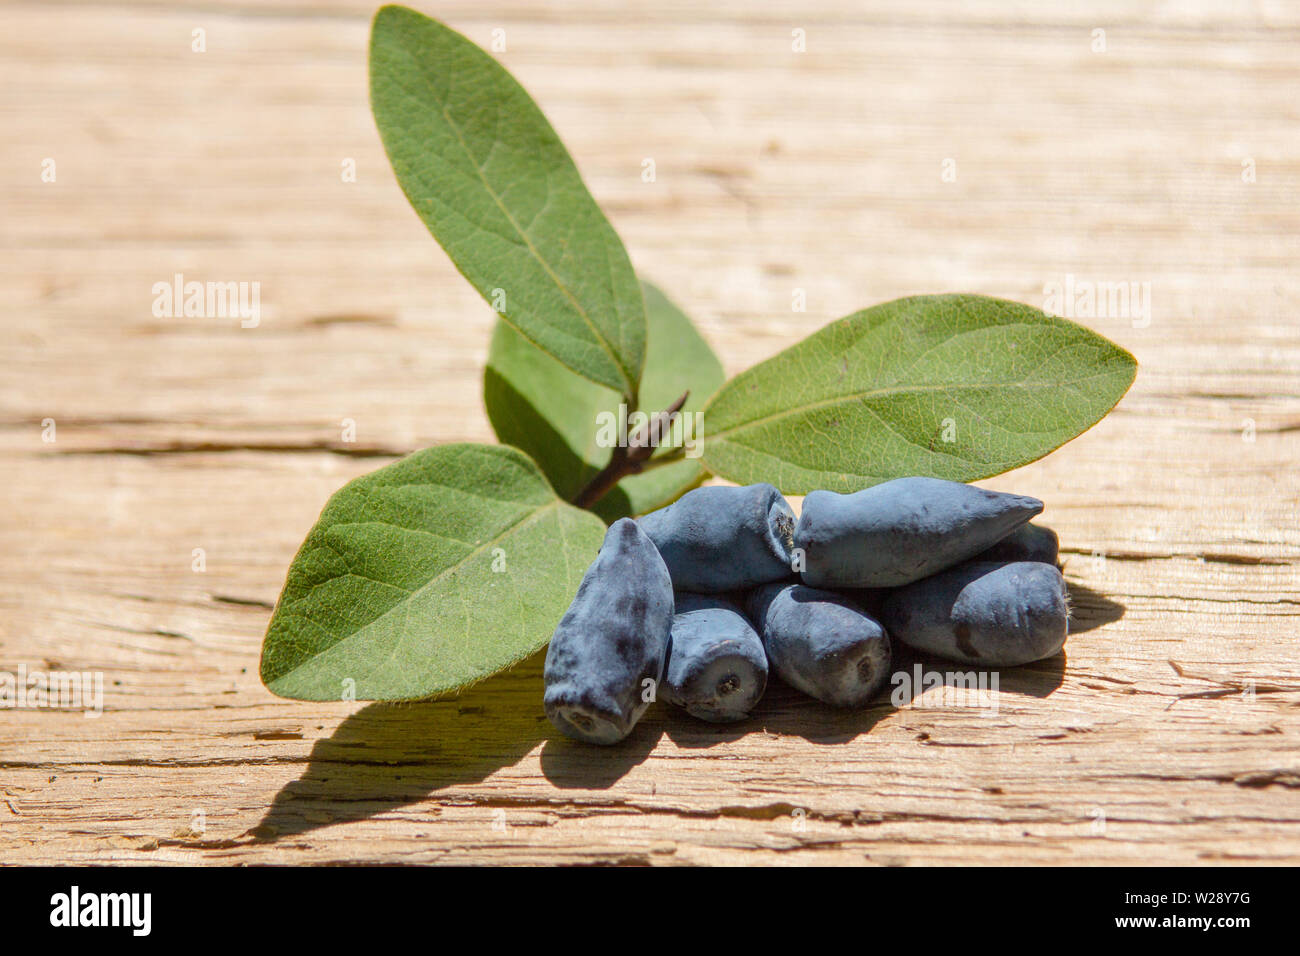 Honeyberry (Lonicera Caerulea var. Kamtschatica), close up of fruit with leaves on wooden board Stock Photo